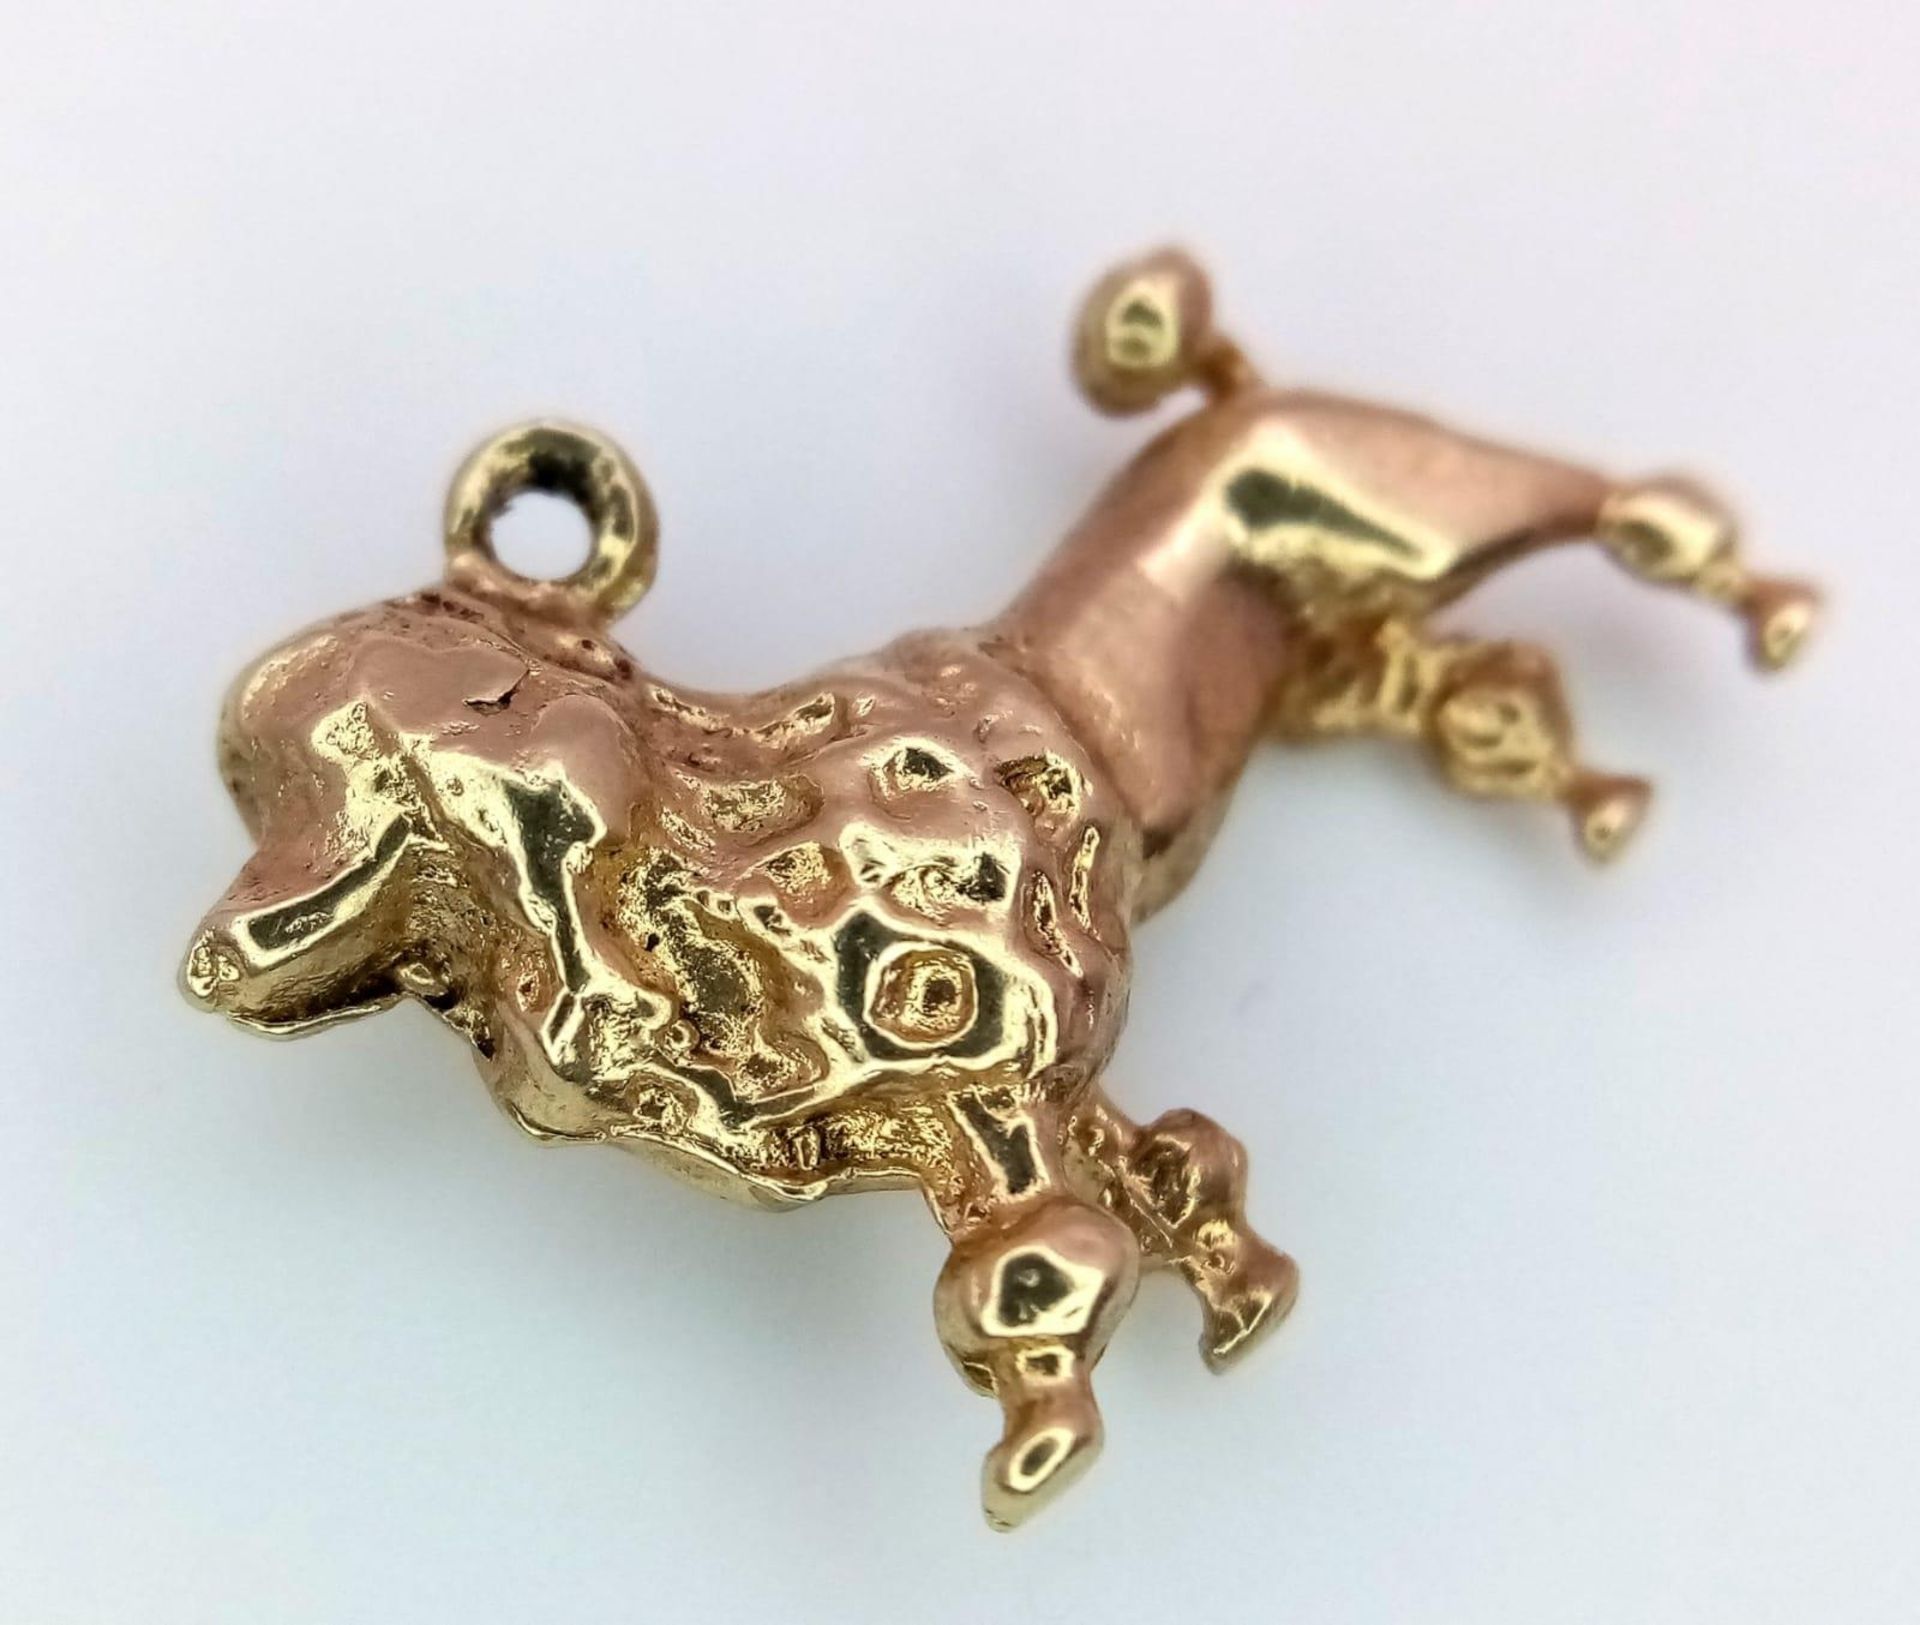 A 9K Yellow Gold French Poodle Pendant/Charm. 2cm. 3.5g weight. - Image 2 of 3